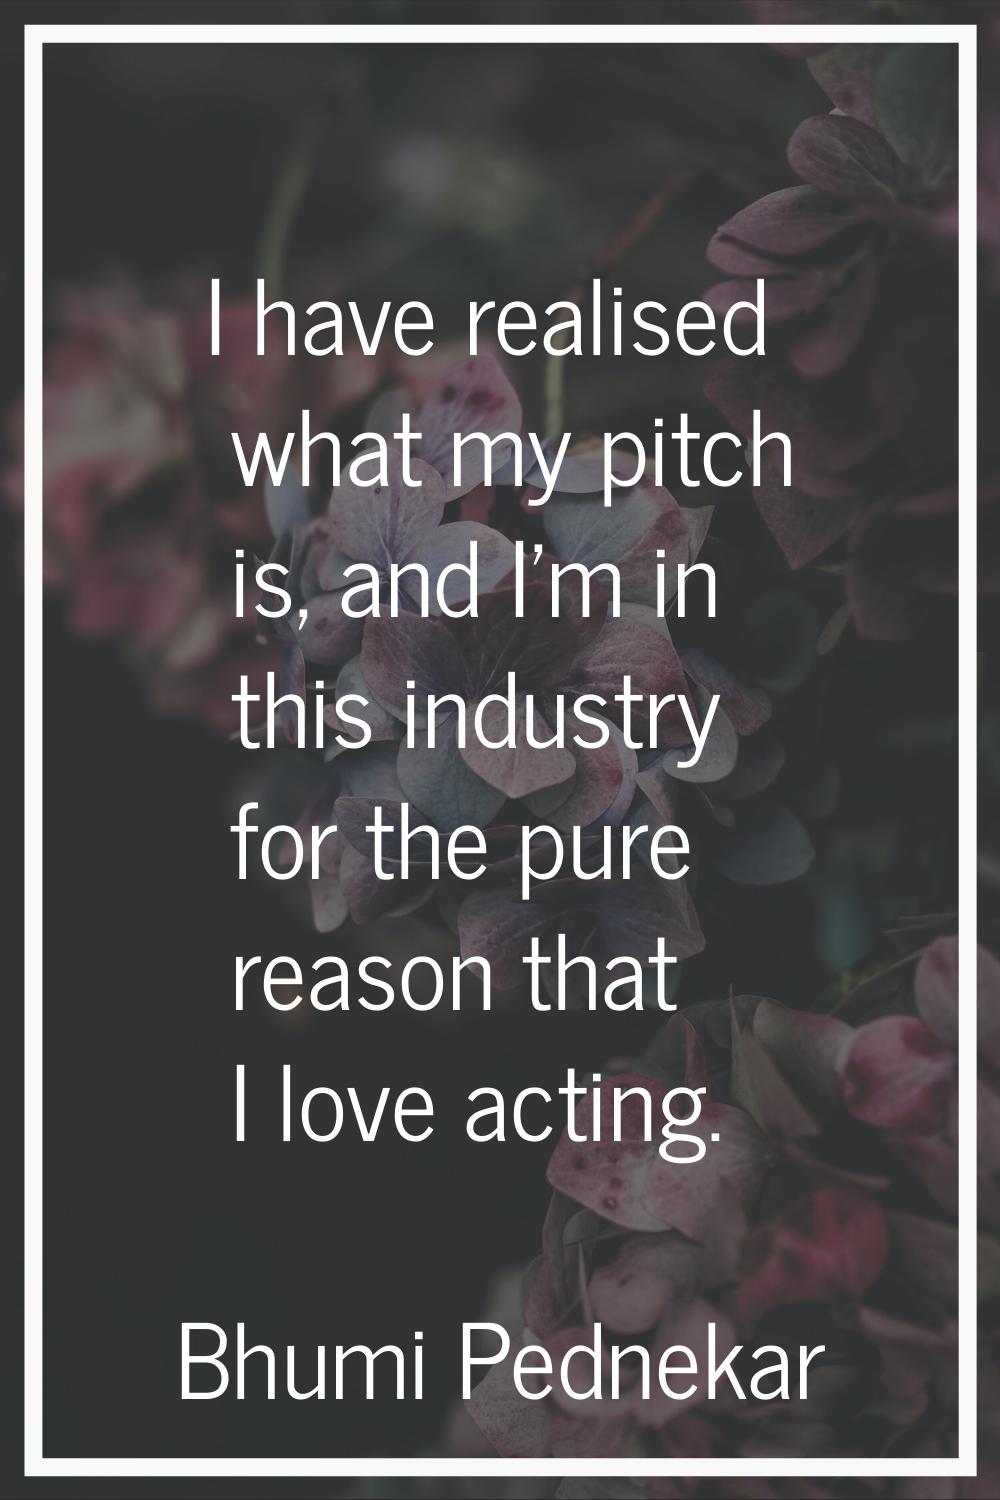 I have realised what my pitch is, and I'm in this industry for the pure reason that I love acting.